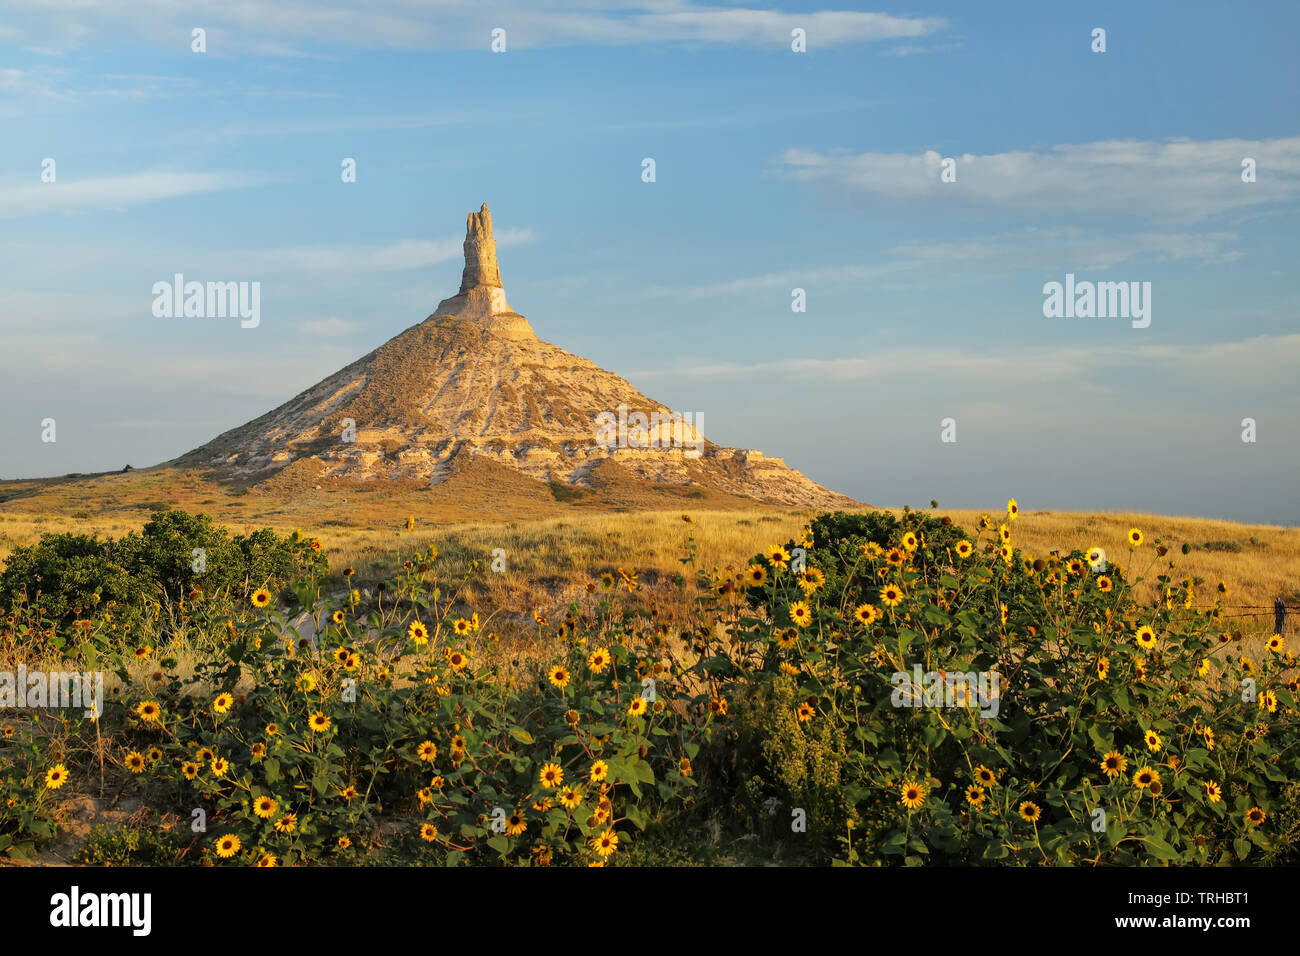 Chimney Rock National Historic Site with sunflowers, western Nebraska, USA. The peak of Chimney Rock is 1289 meters above sea level. Stock Photo